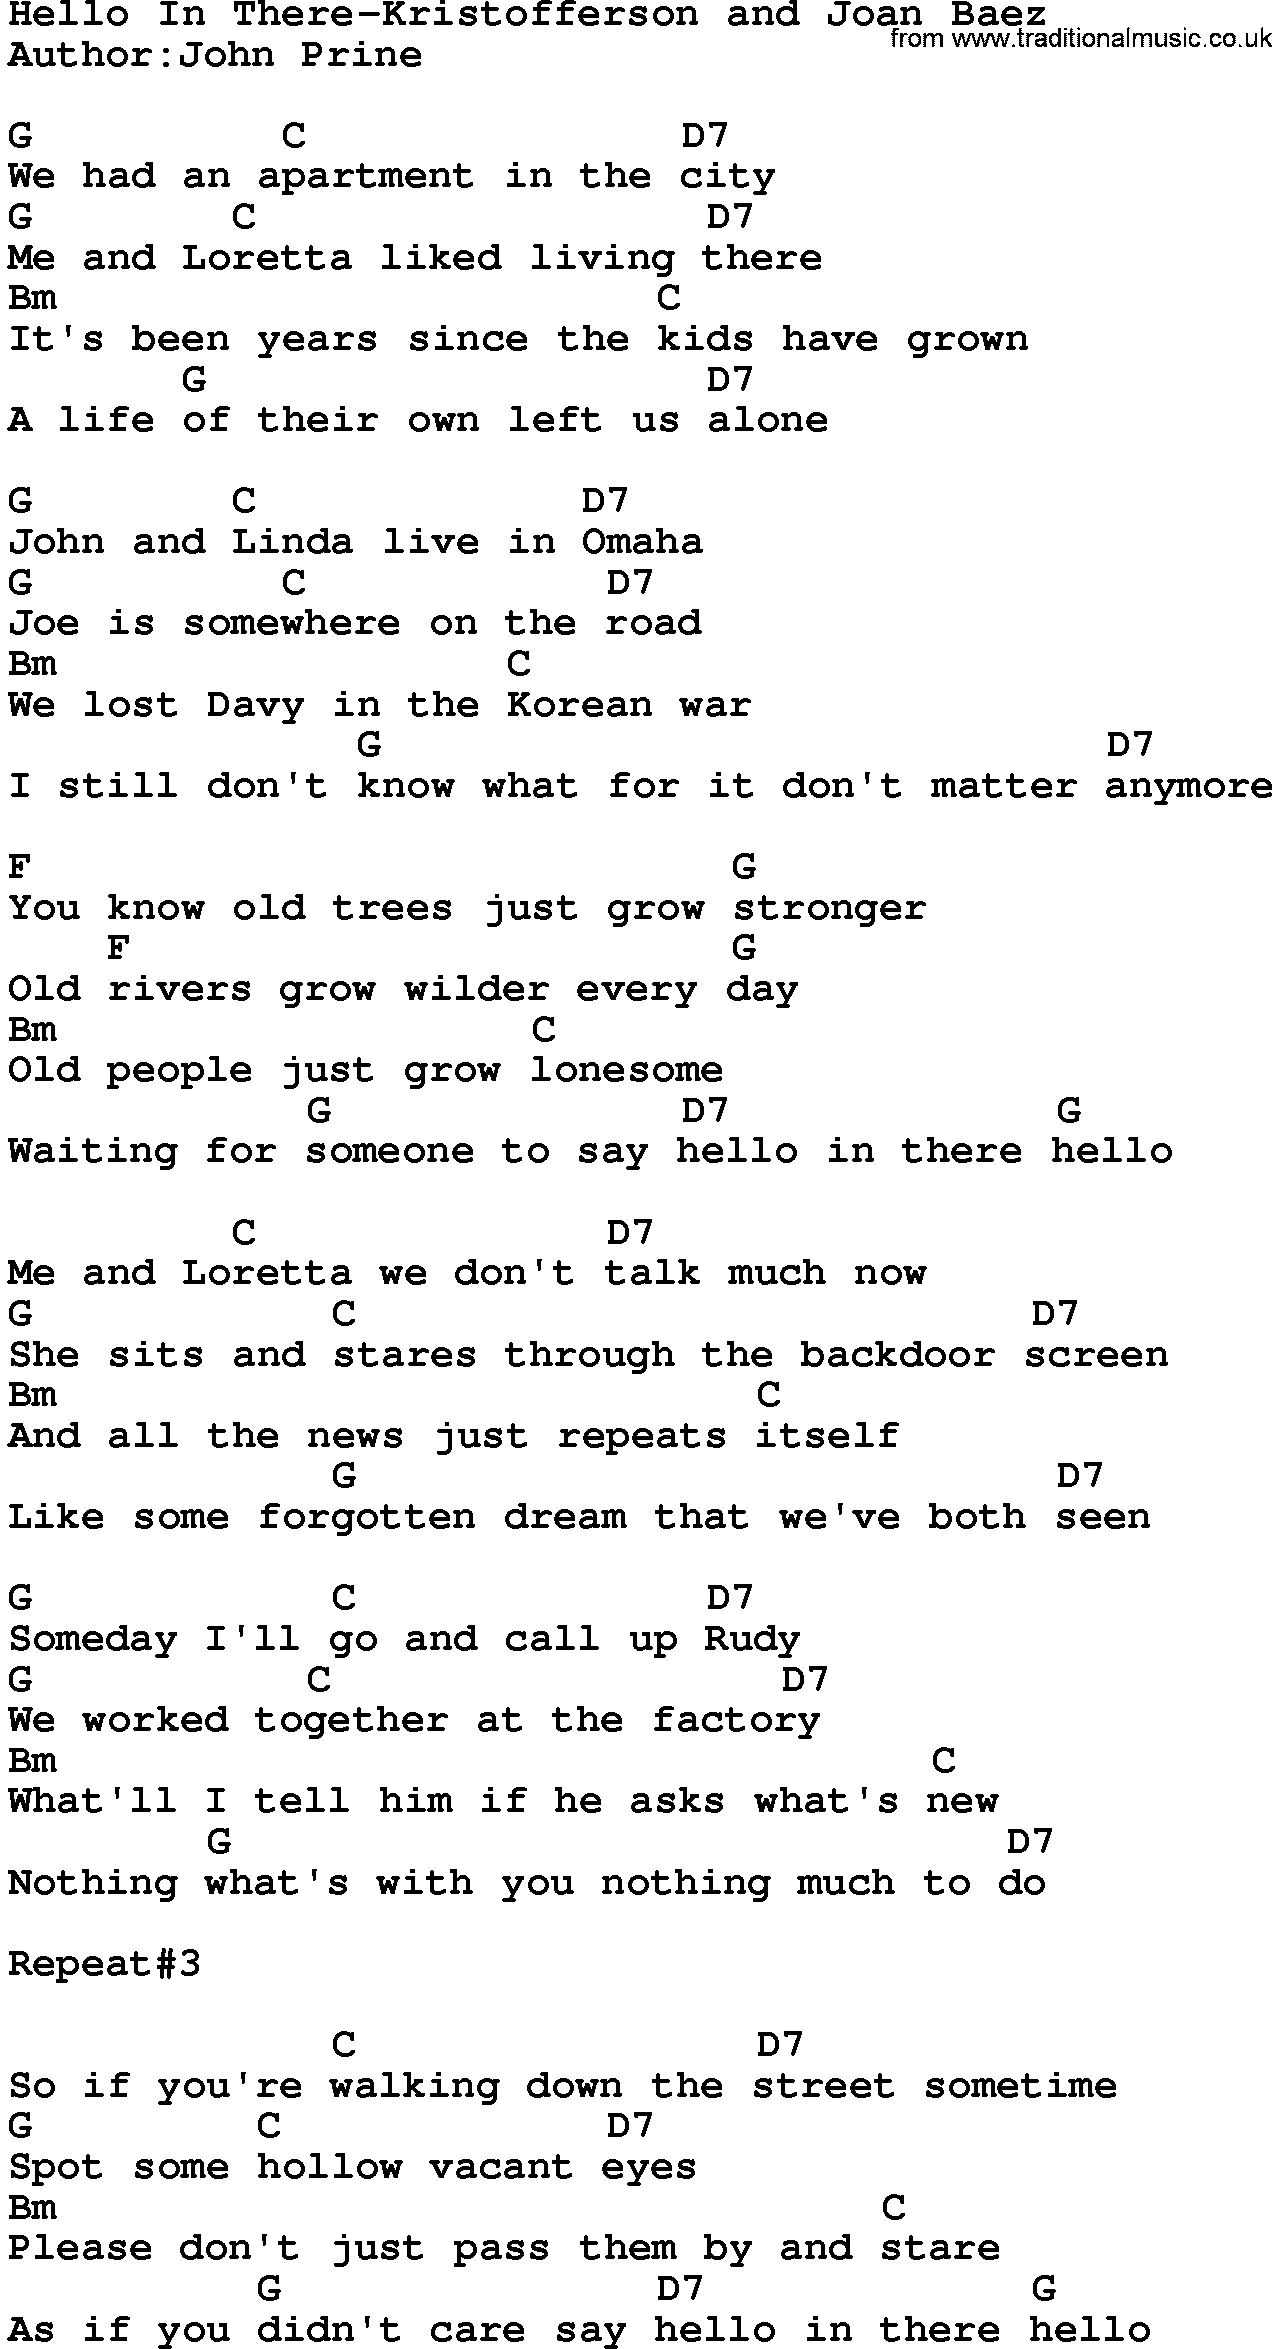 Country music song: Hello In There-Kristofferson And Joan Baez lyrics and chords